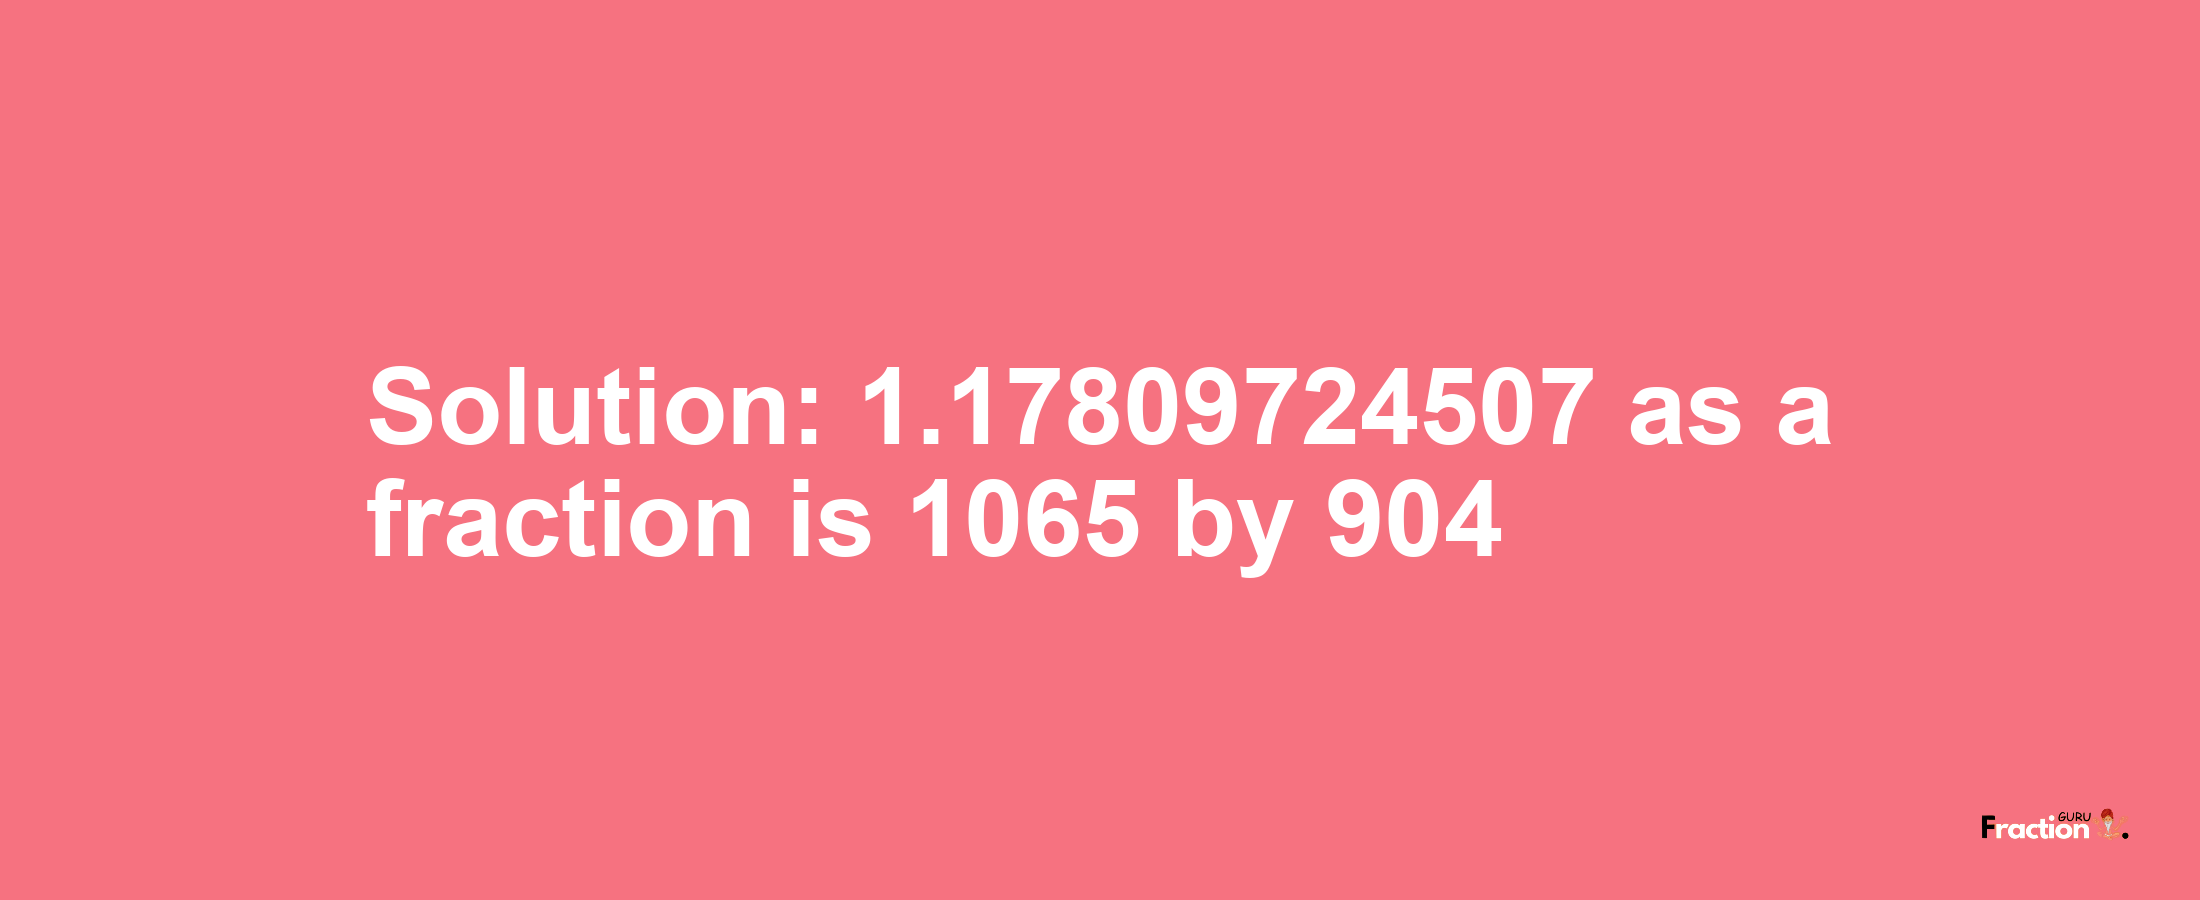 Solution:1.17809724507 as a fraction is 1065/904